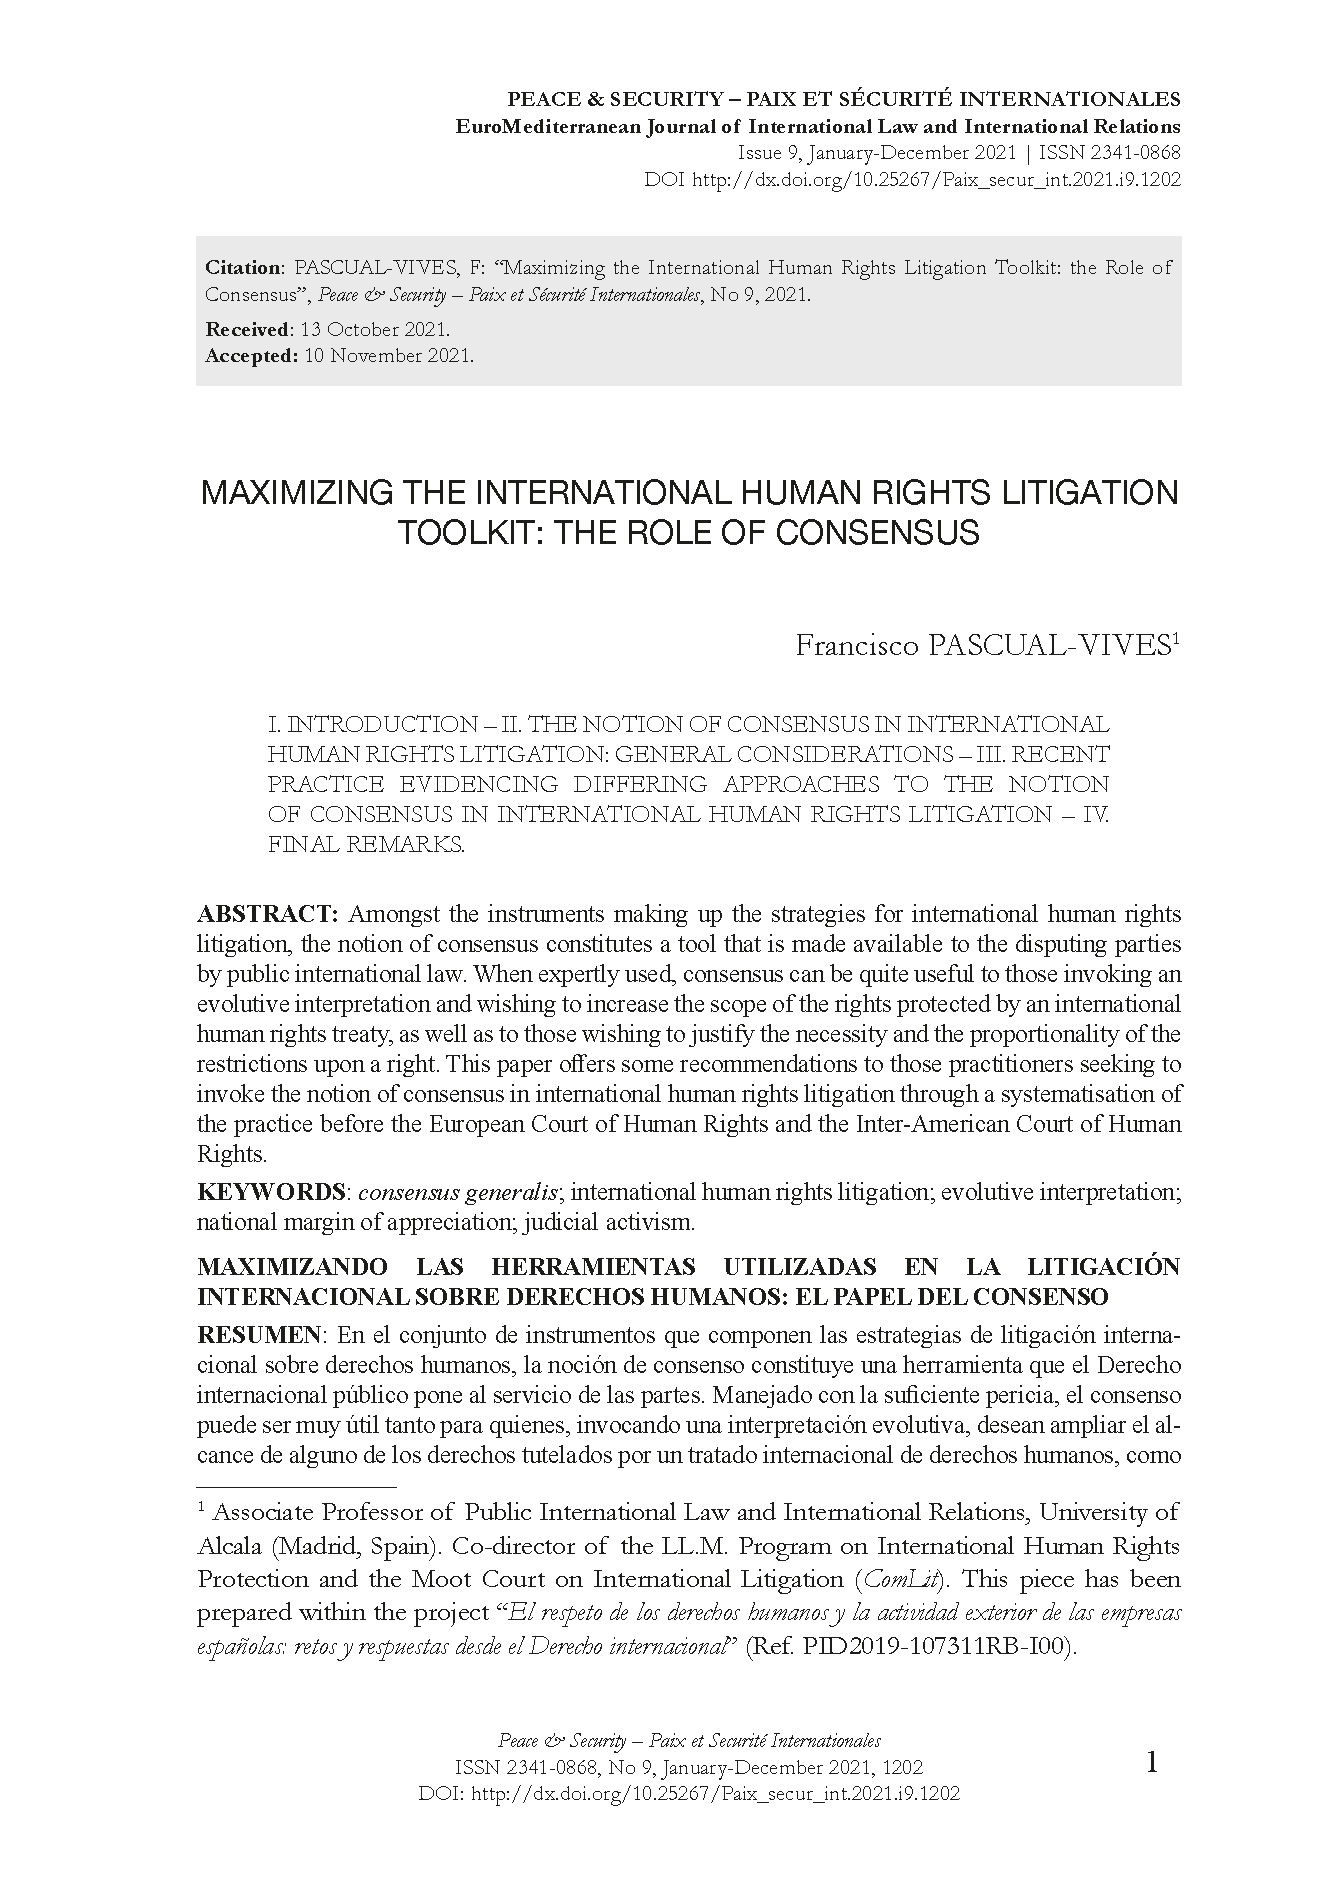 Maximizing the International Human Rights Litigation Toolkit: the Role of Consensus